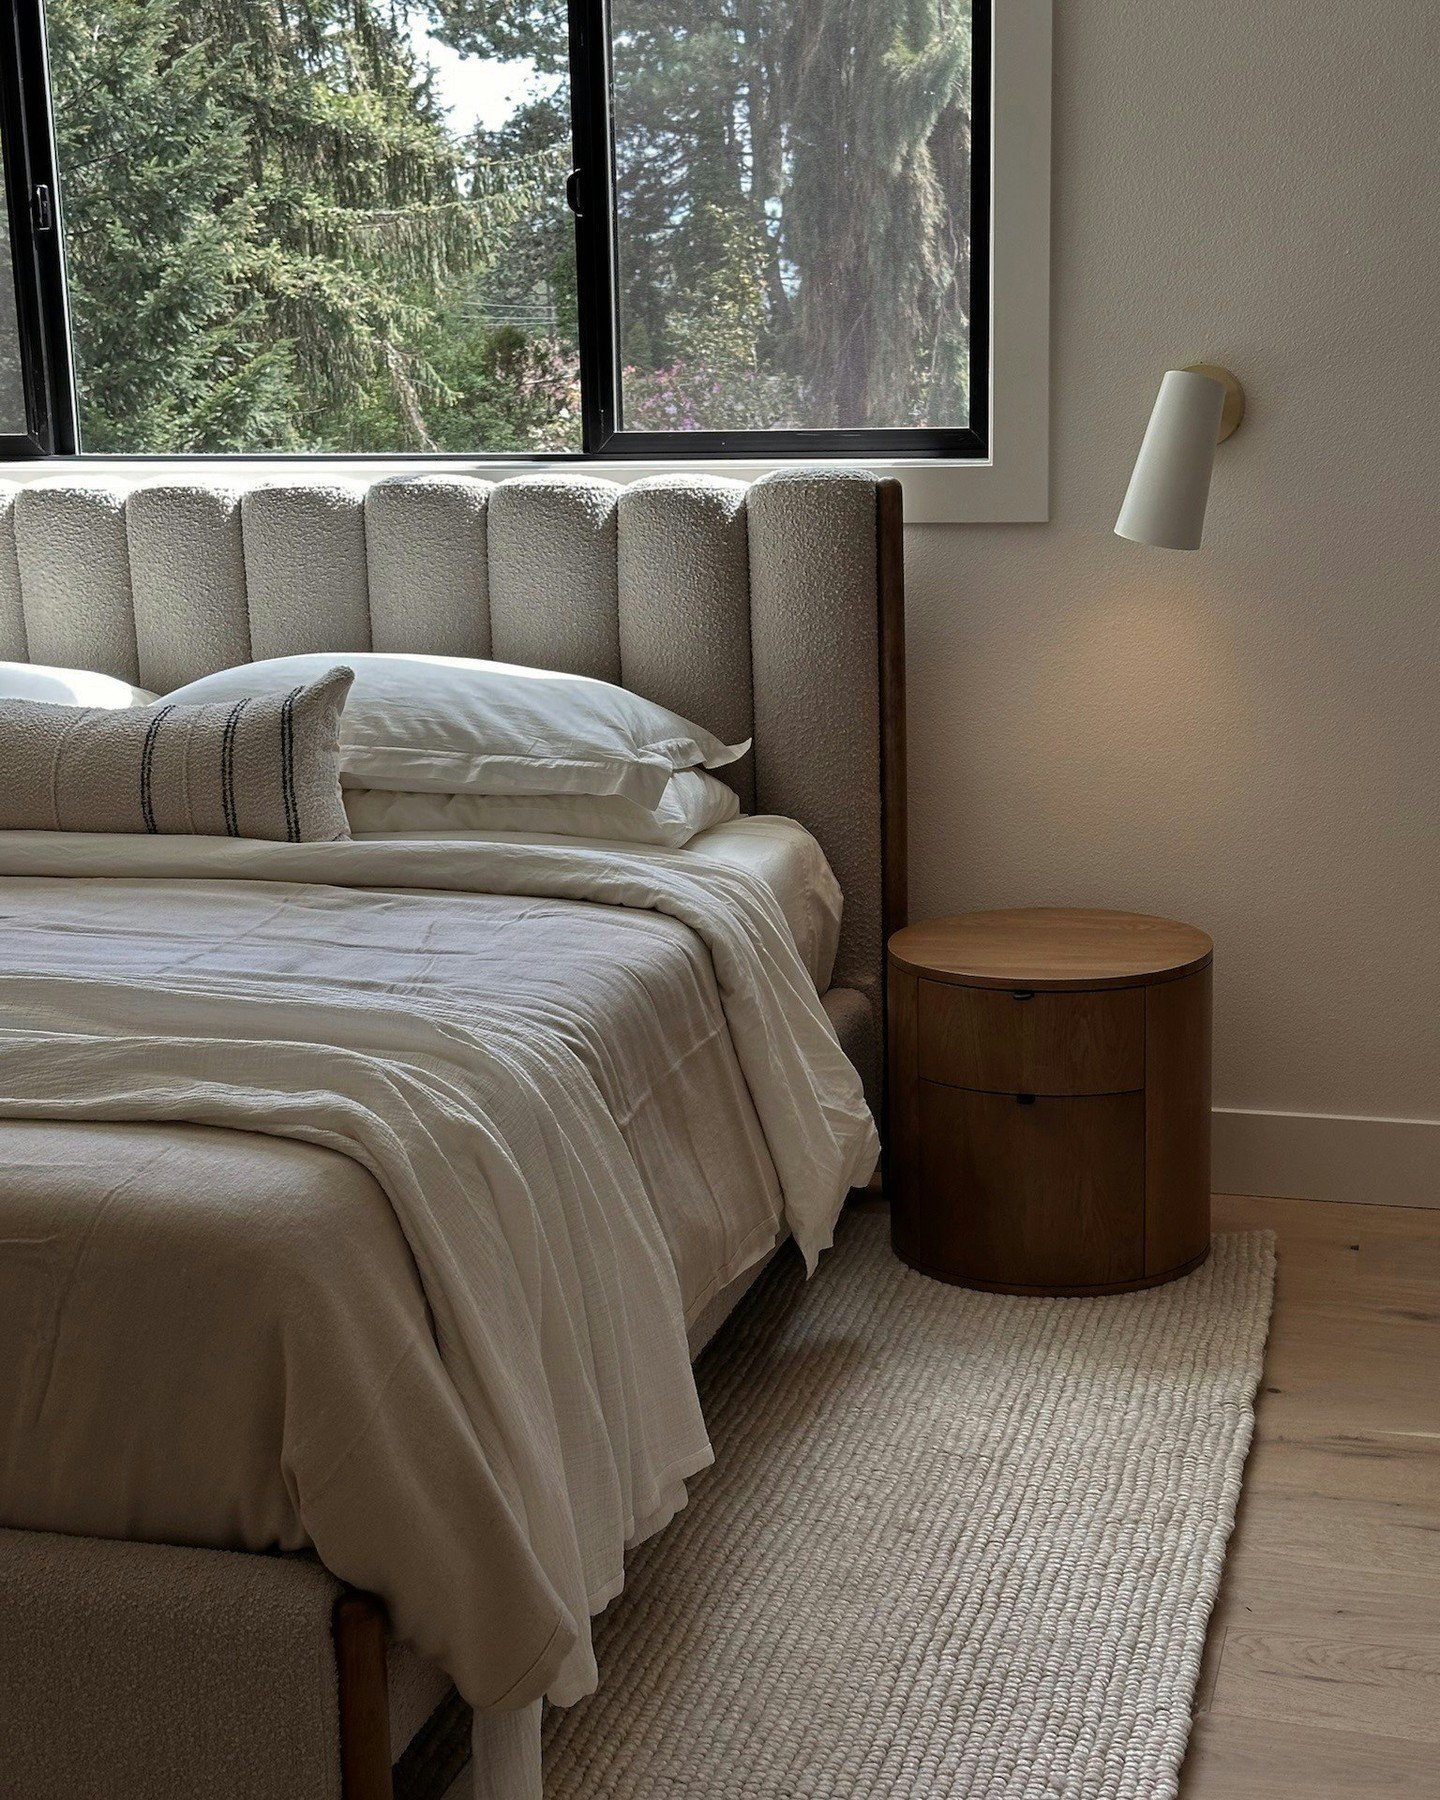 It's the little things 🕊️

We redesigned this bedroom at our #QuarryHilltop project channeling our Sunday House ethos. Warm, simple, organic, and of course - timeless.

We can't wait to show you all of the spaces!

.
.
.
{ Sunday House, Home Transfo